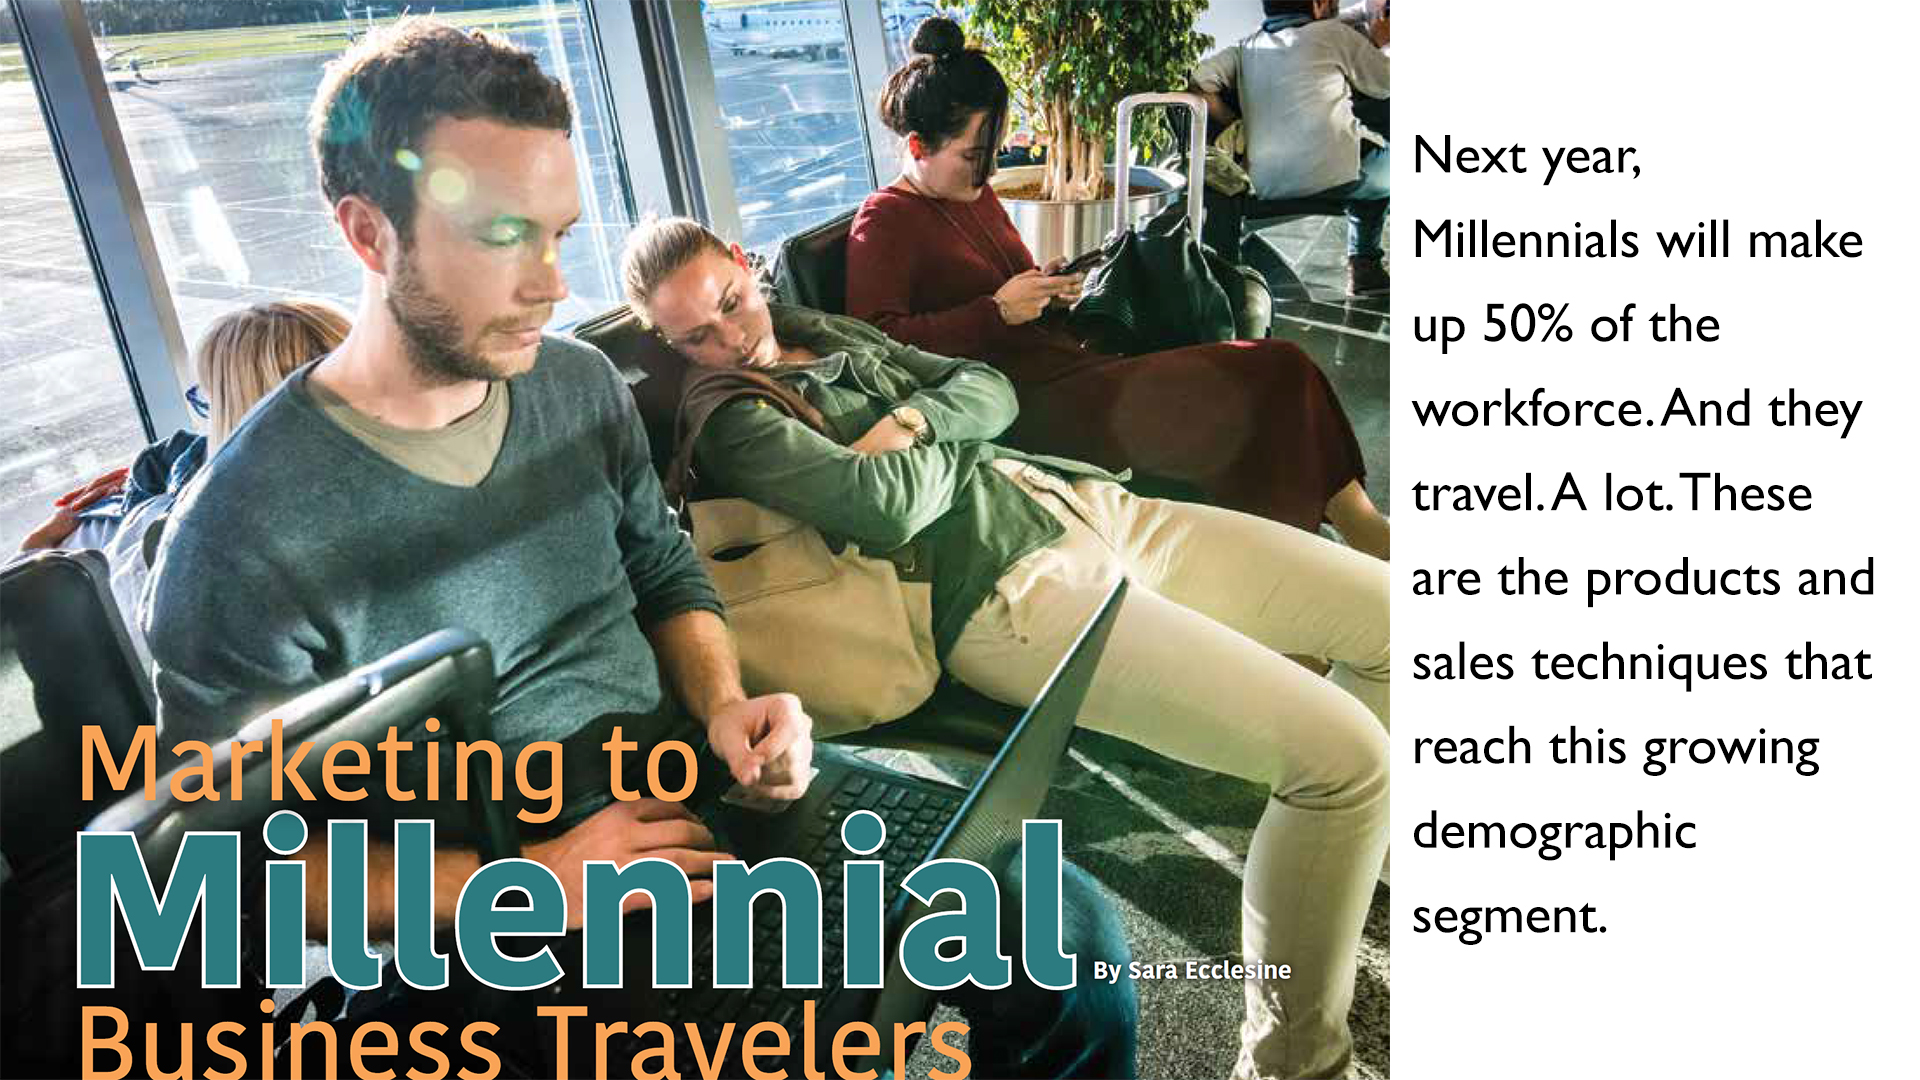 Marketing to Millennial Business Travelers